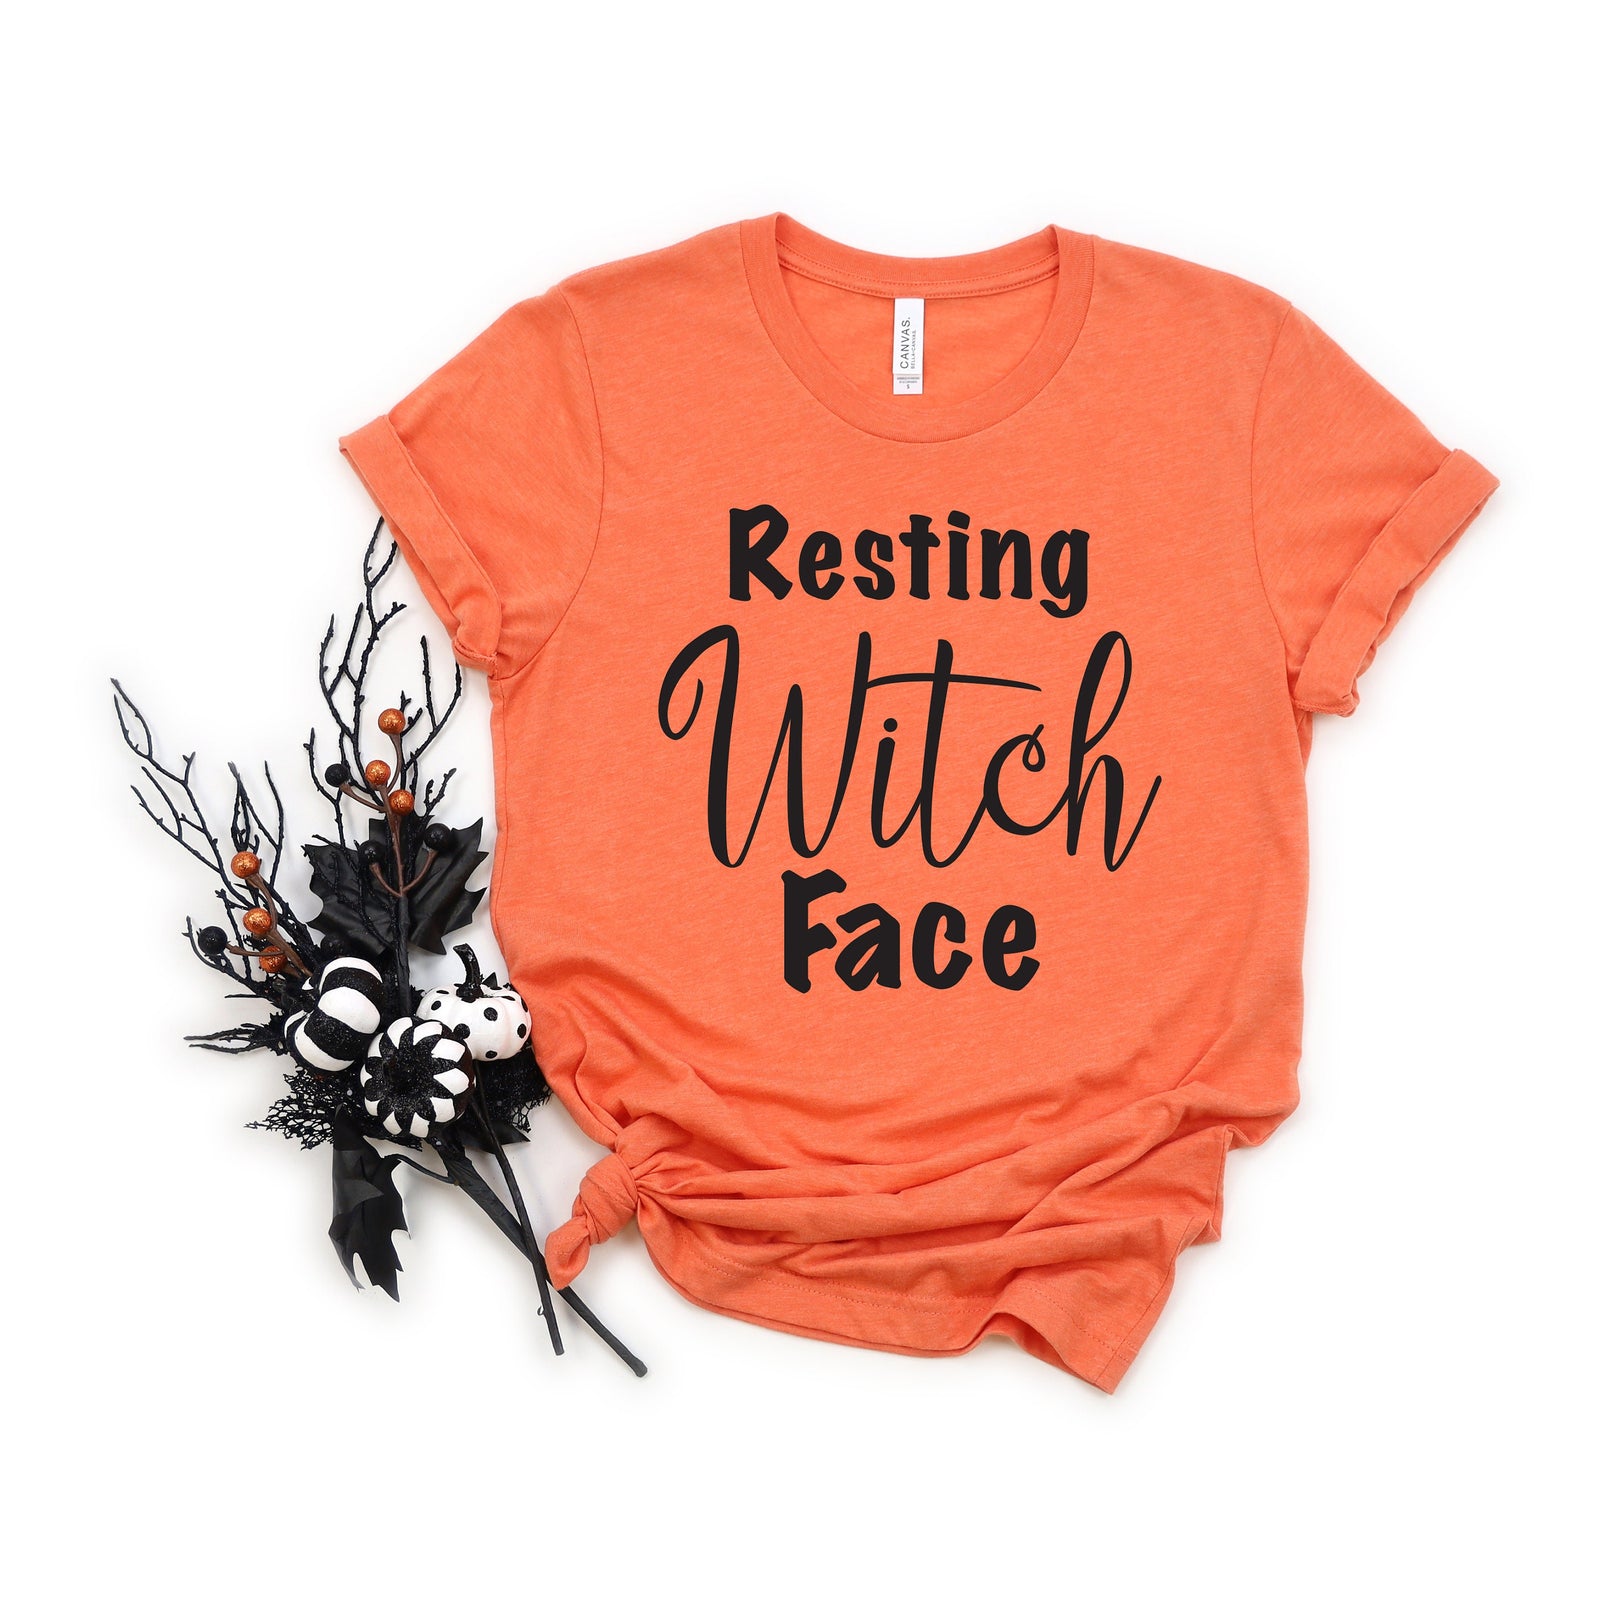 Resting Witch Face Adult T Shirt - Halloween - Funny Not So Scary Shirts